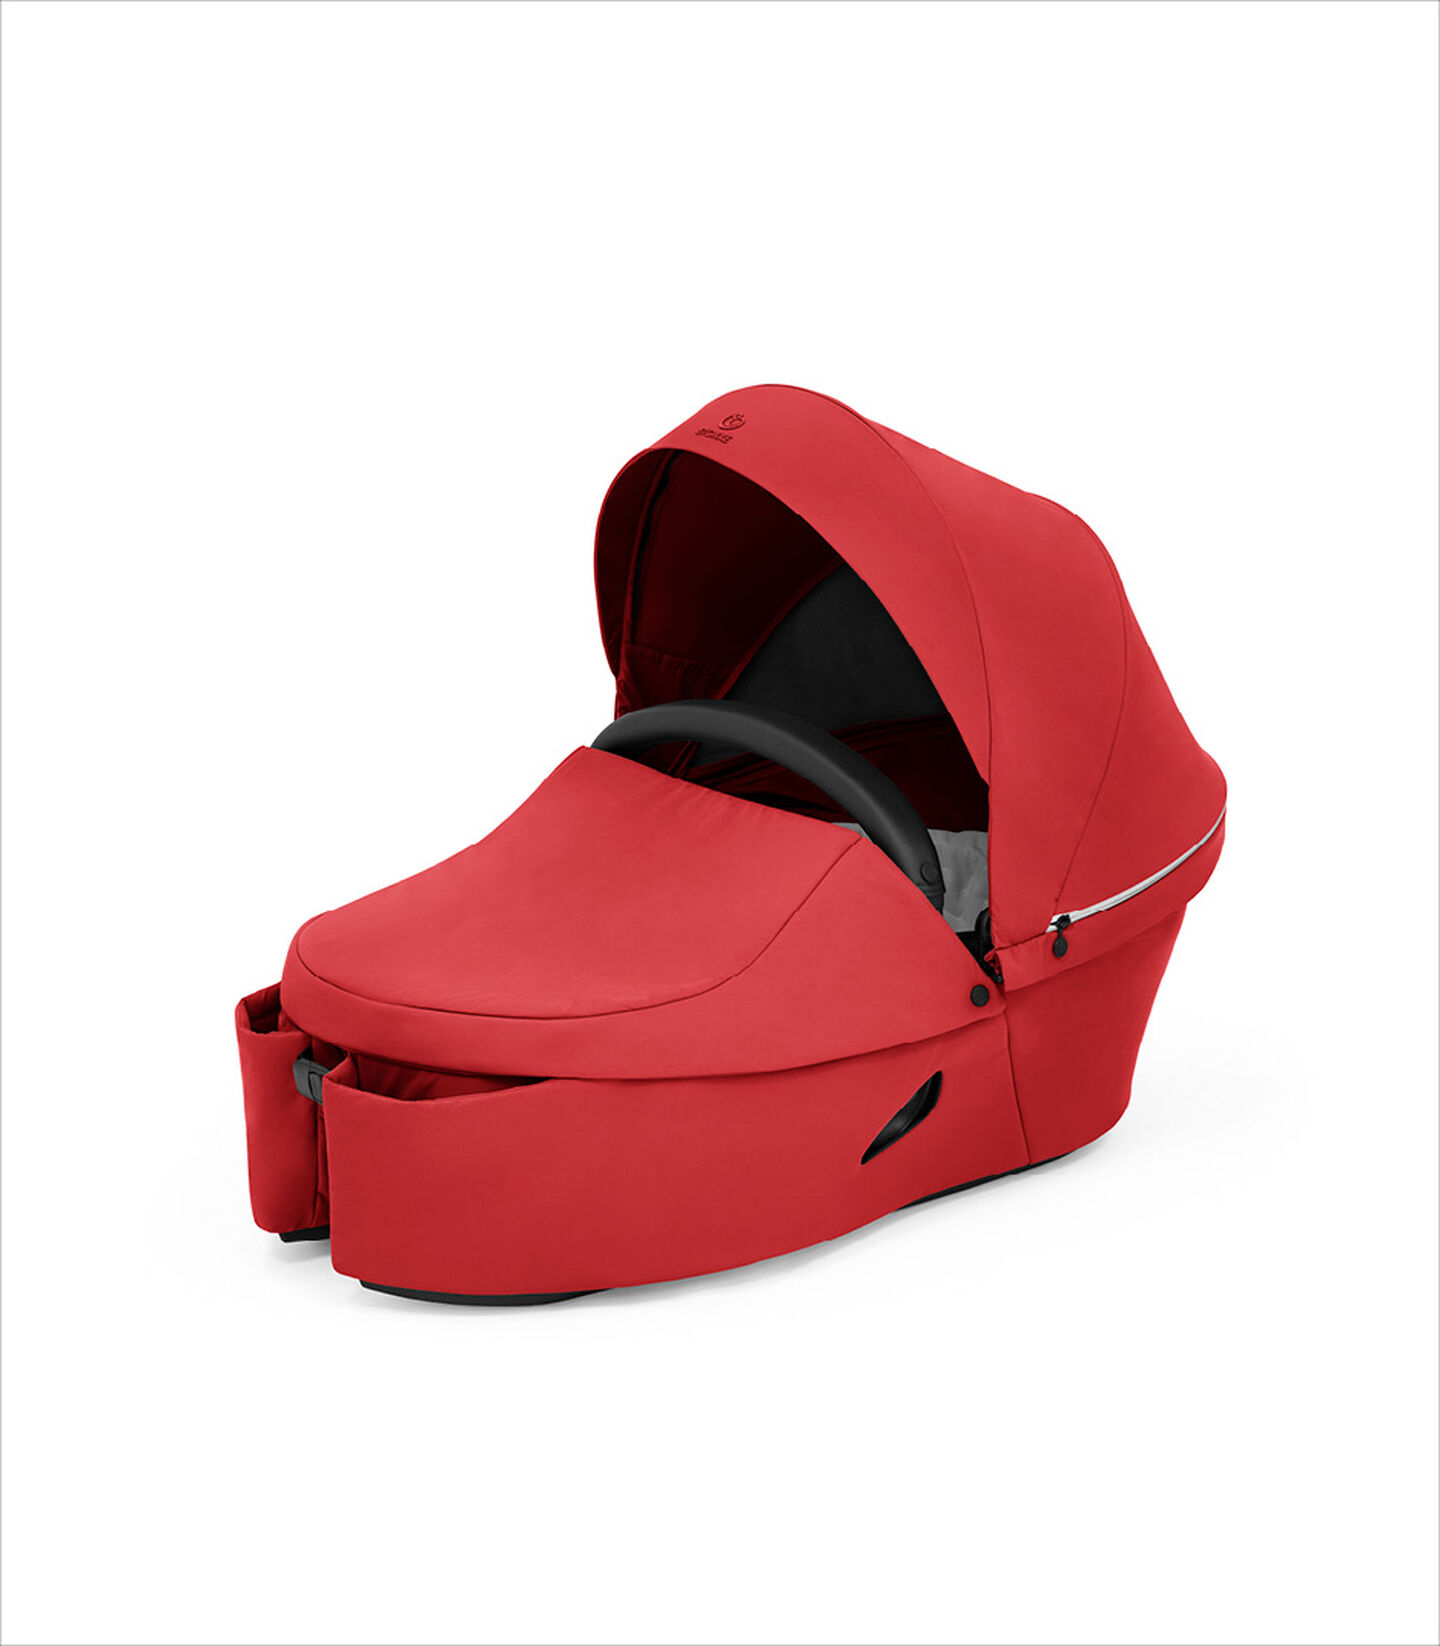 Stokke® Xplory® X reiswieg Ruby Red, Ruby Red, mainview view 6